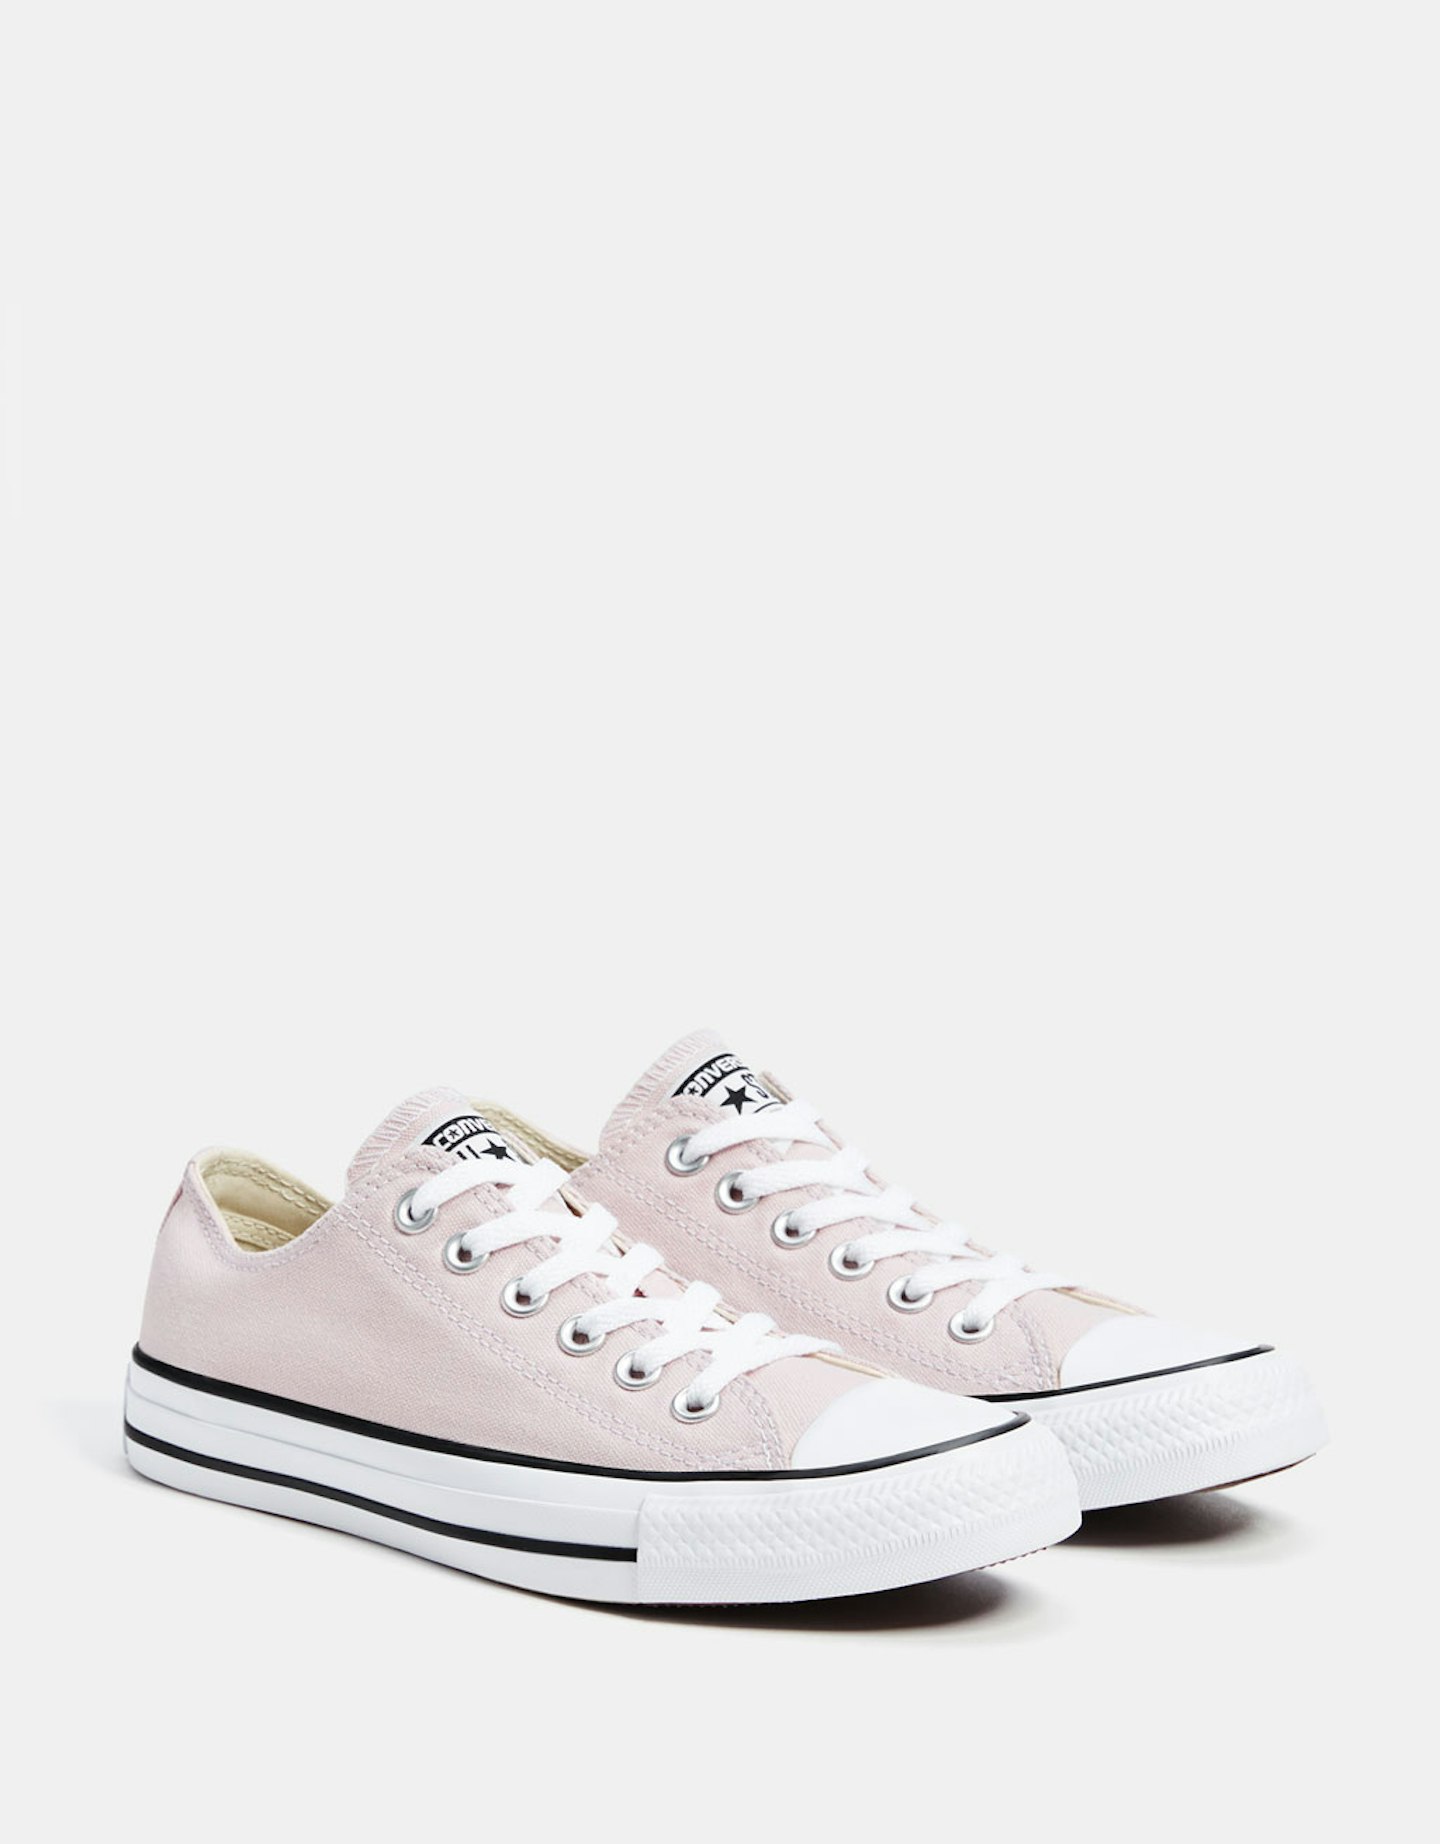 Pink Chuck Taylor trainers by Converse, £45.99